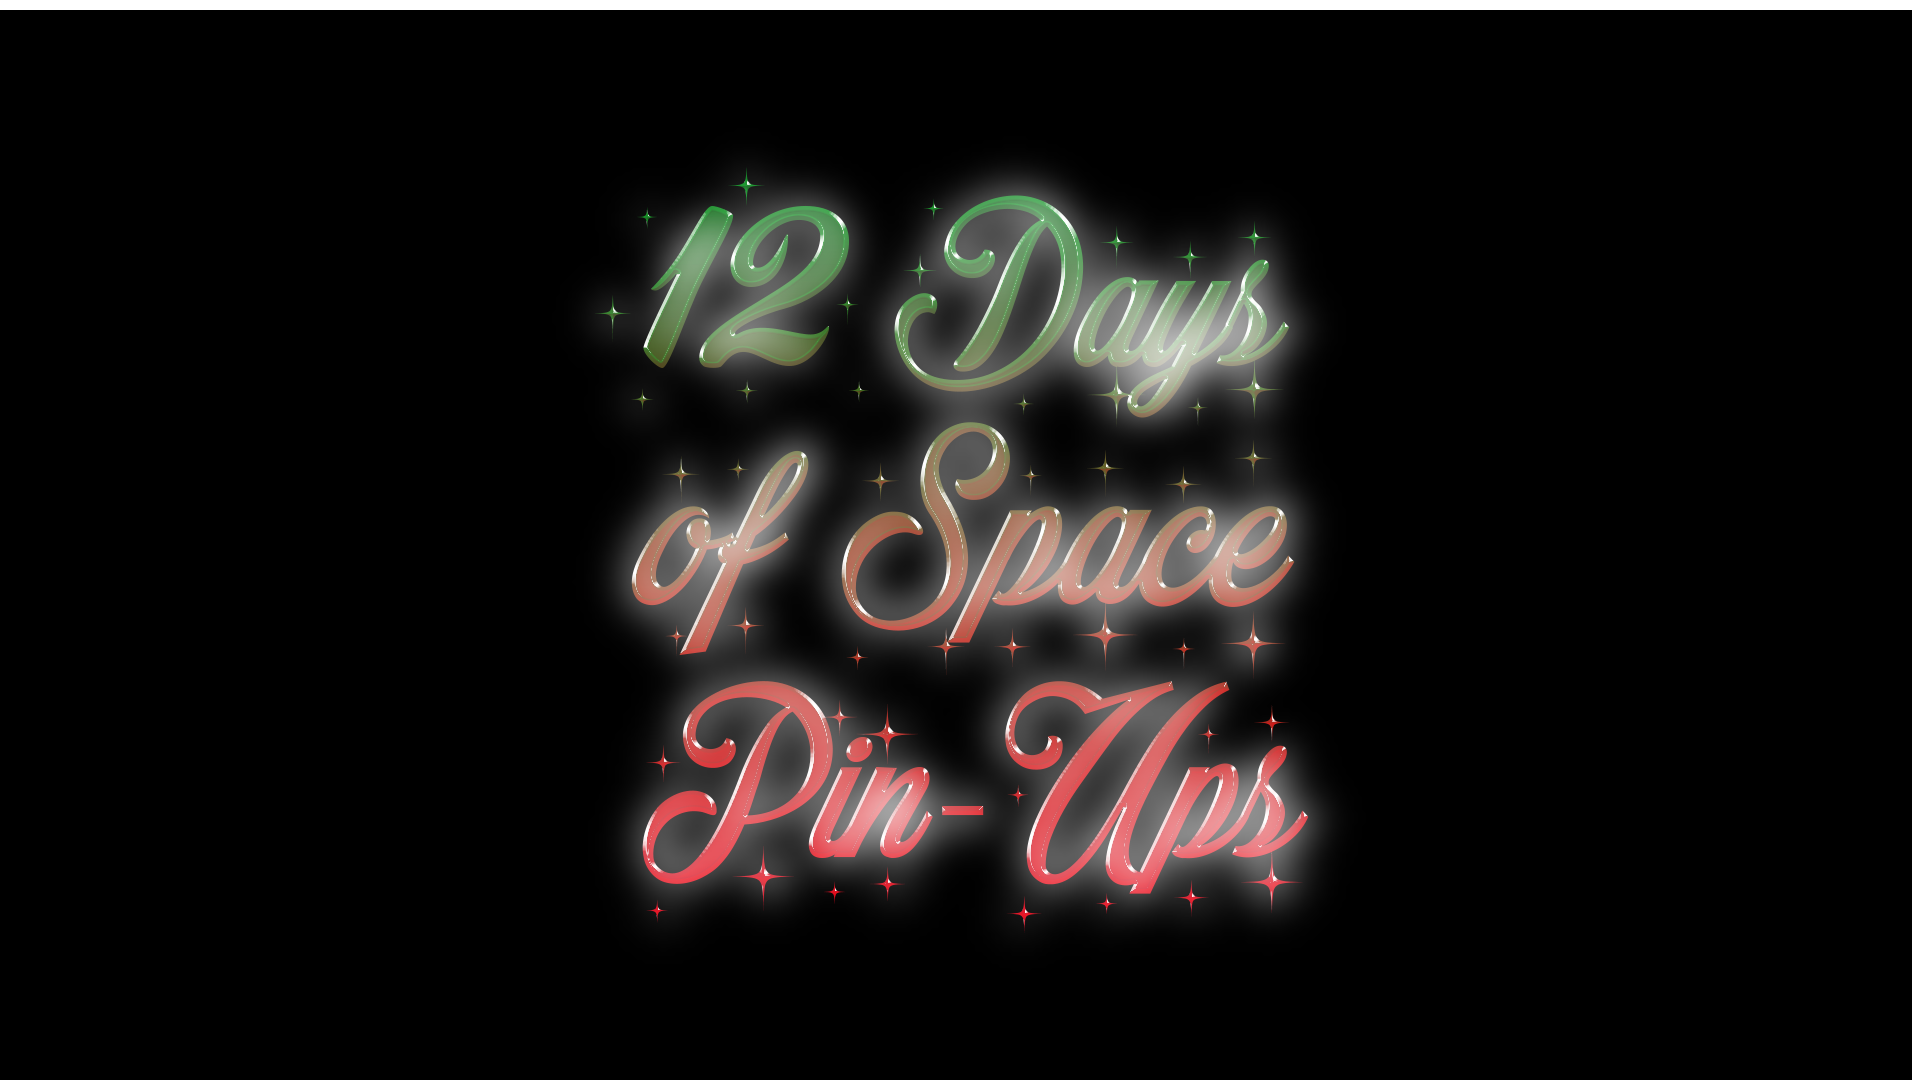 12 Days of Space Pin-Ups